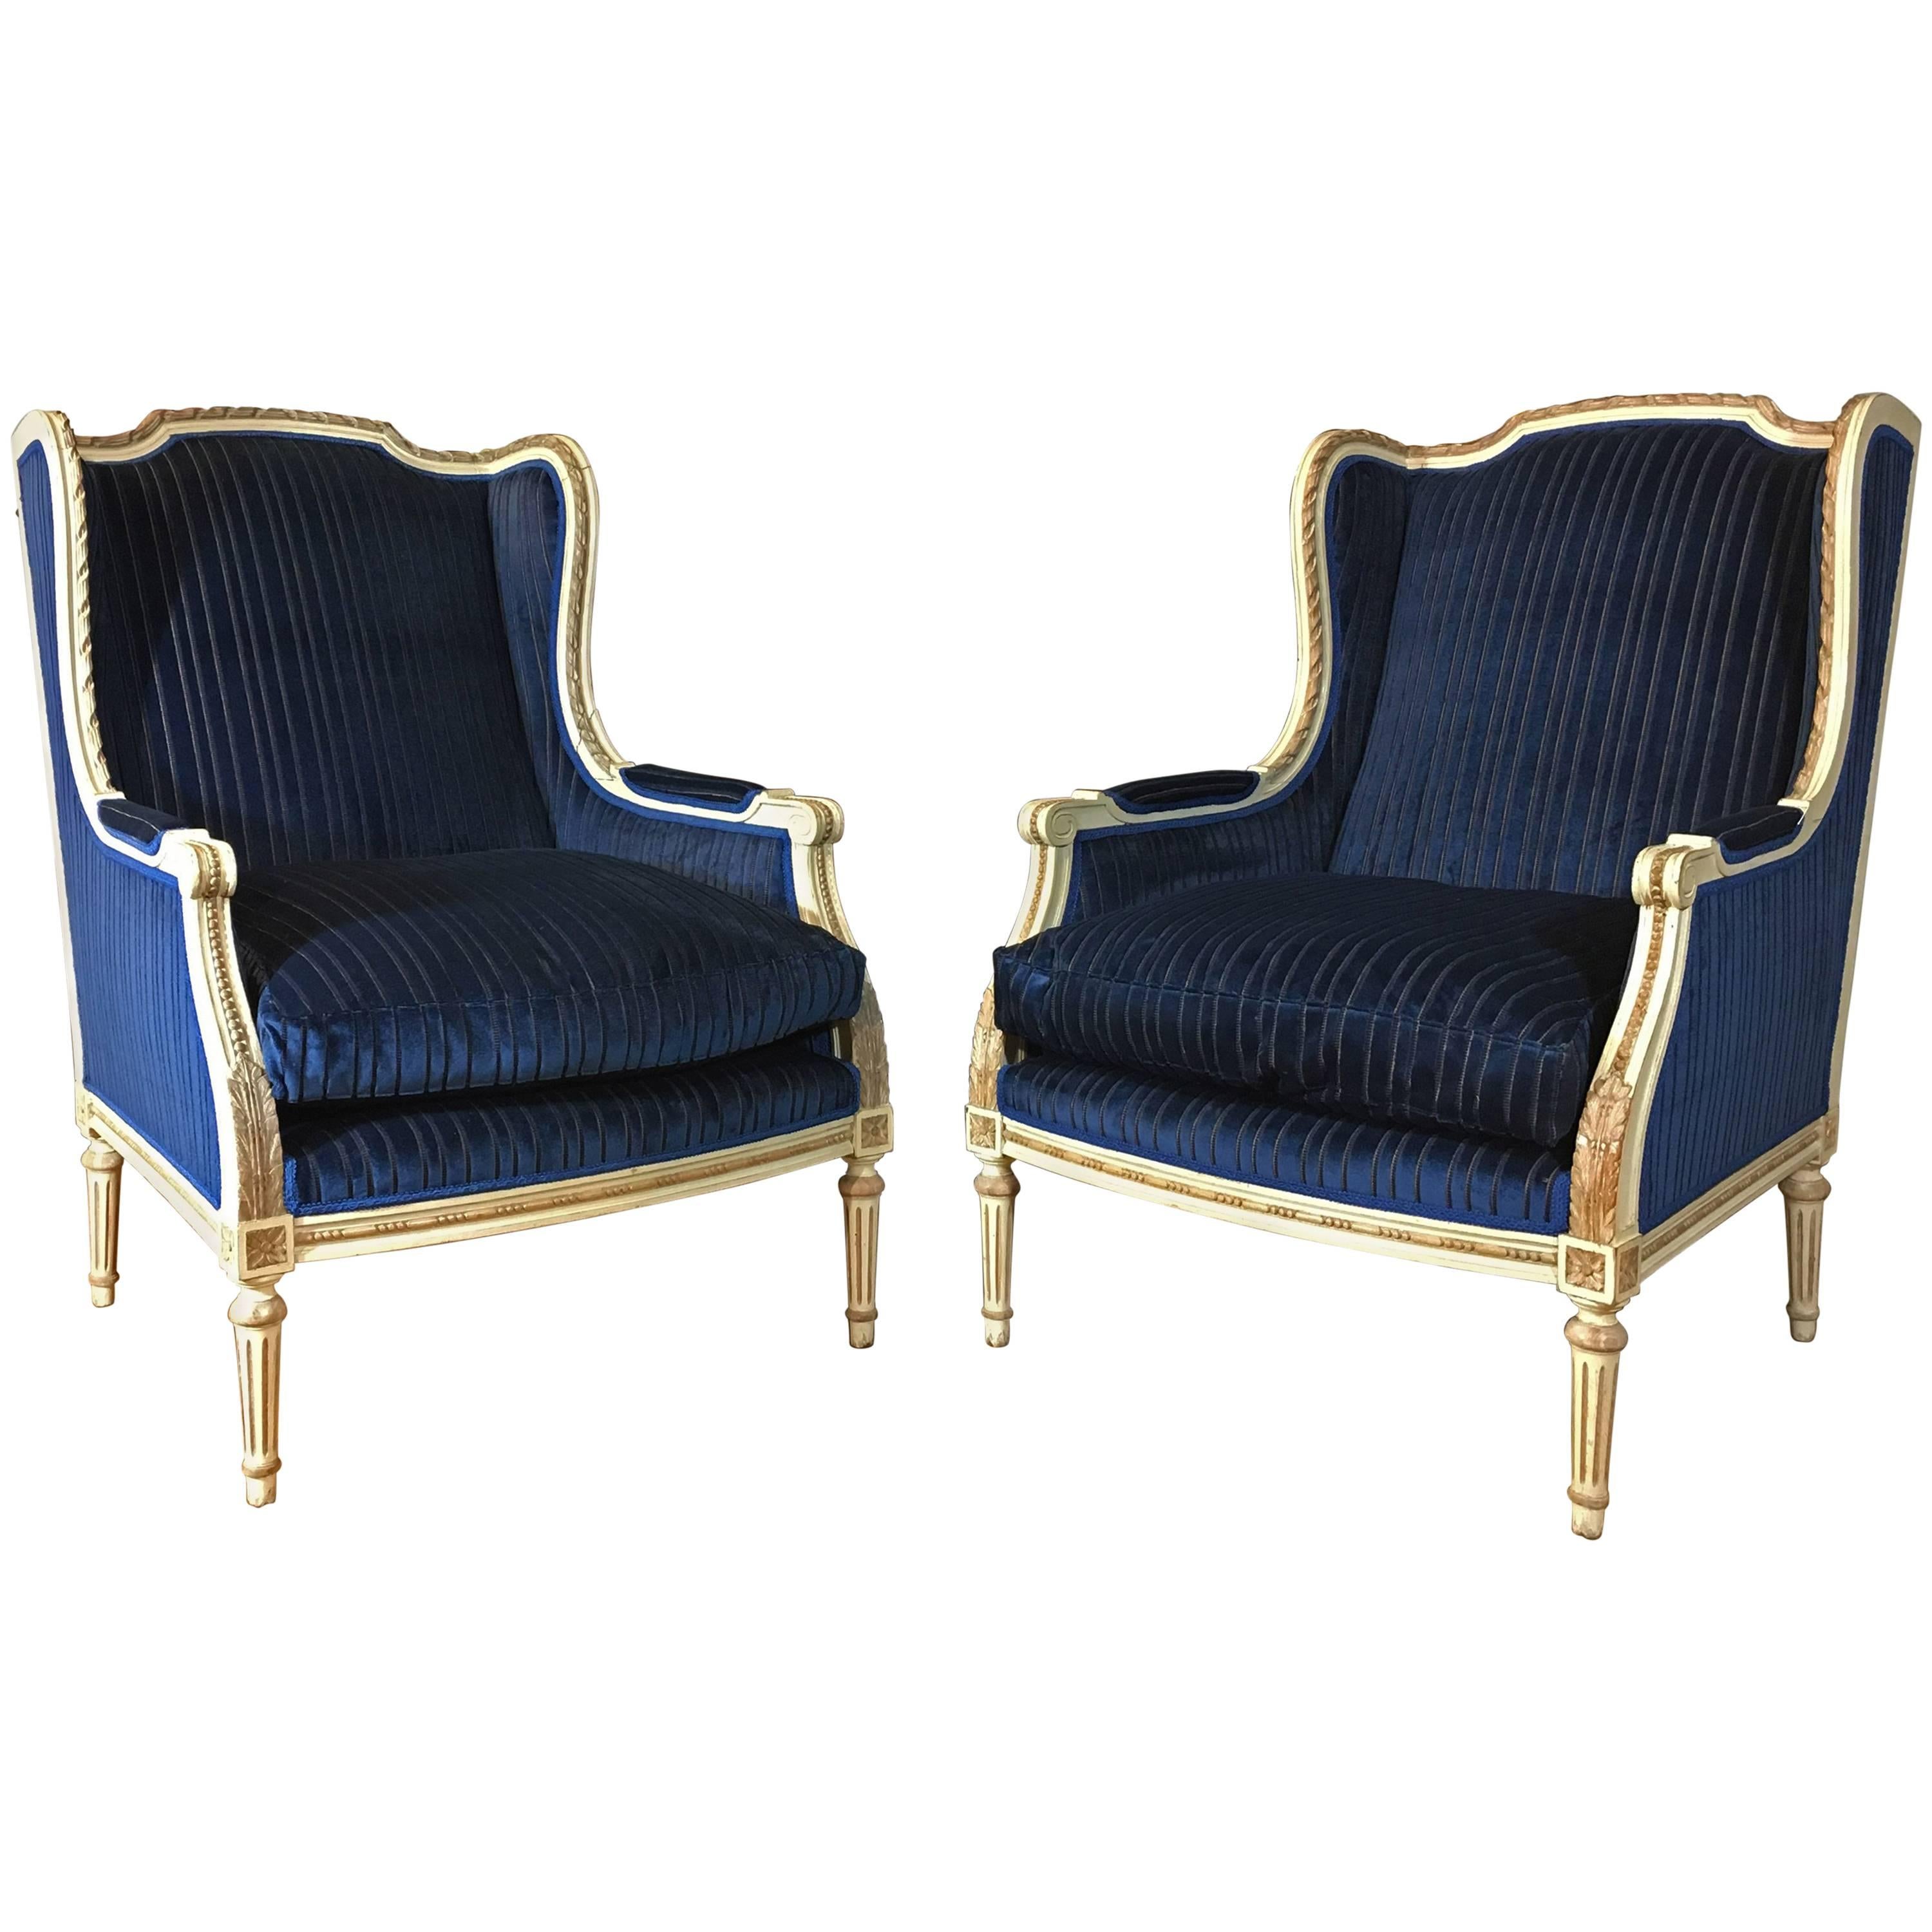 Mid-19th Century Italian Louis XVI Style Painted Polpar Wood Wing Chairs For Sale